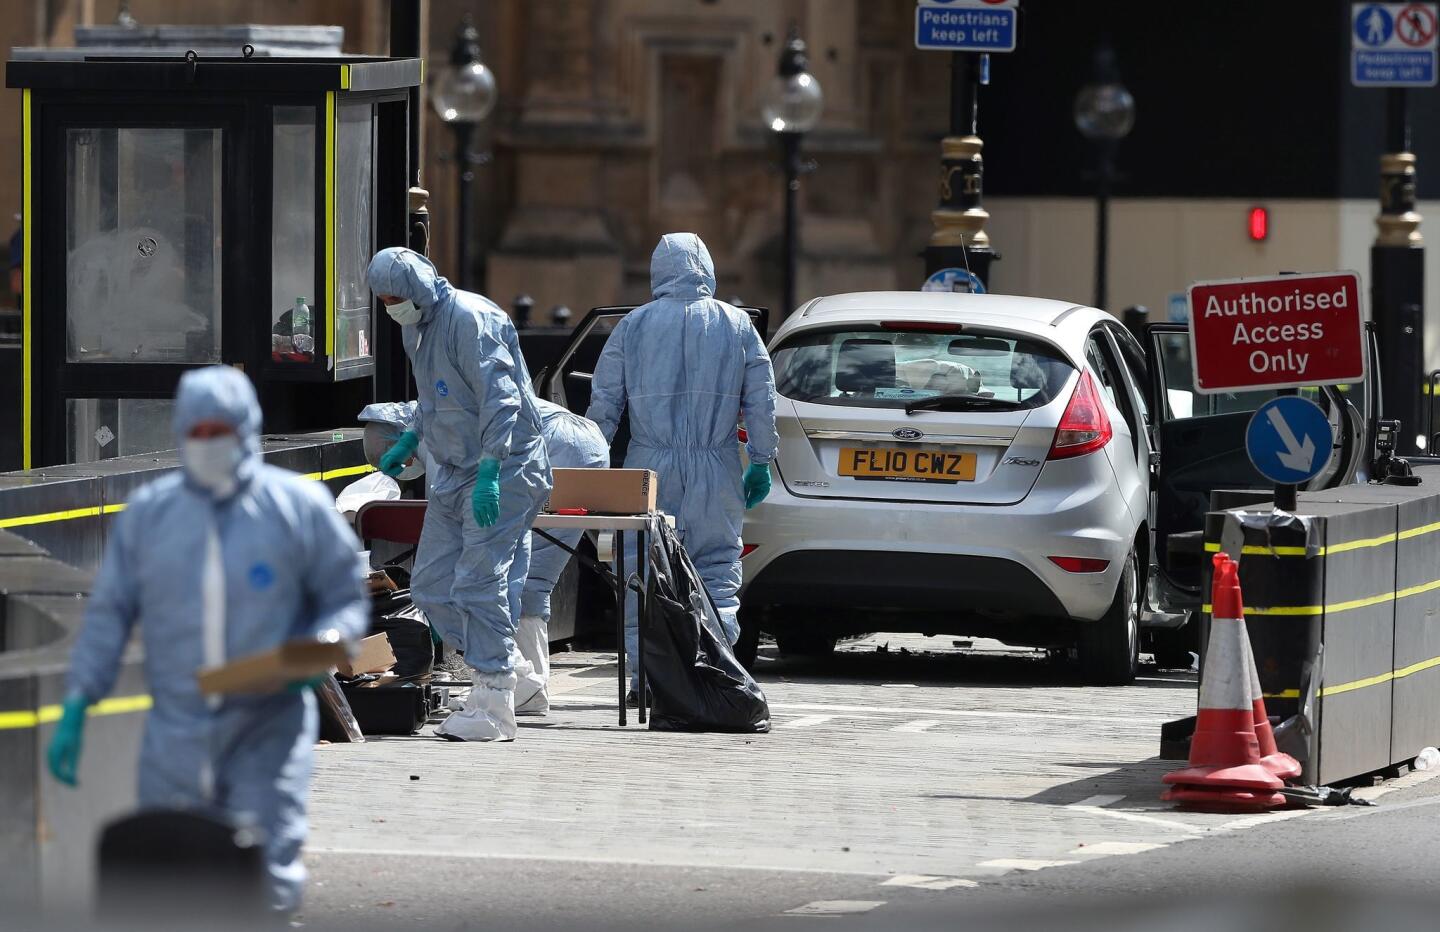 Police forensics officers work around a silver Ford Fiesta that was driven into a barrier at the Houses of Parliament in central London, injuring pedestrians yards from where five people were killed last year.